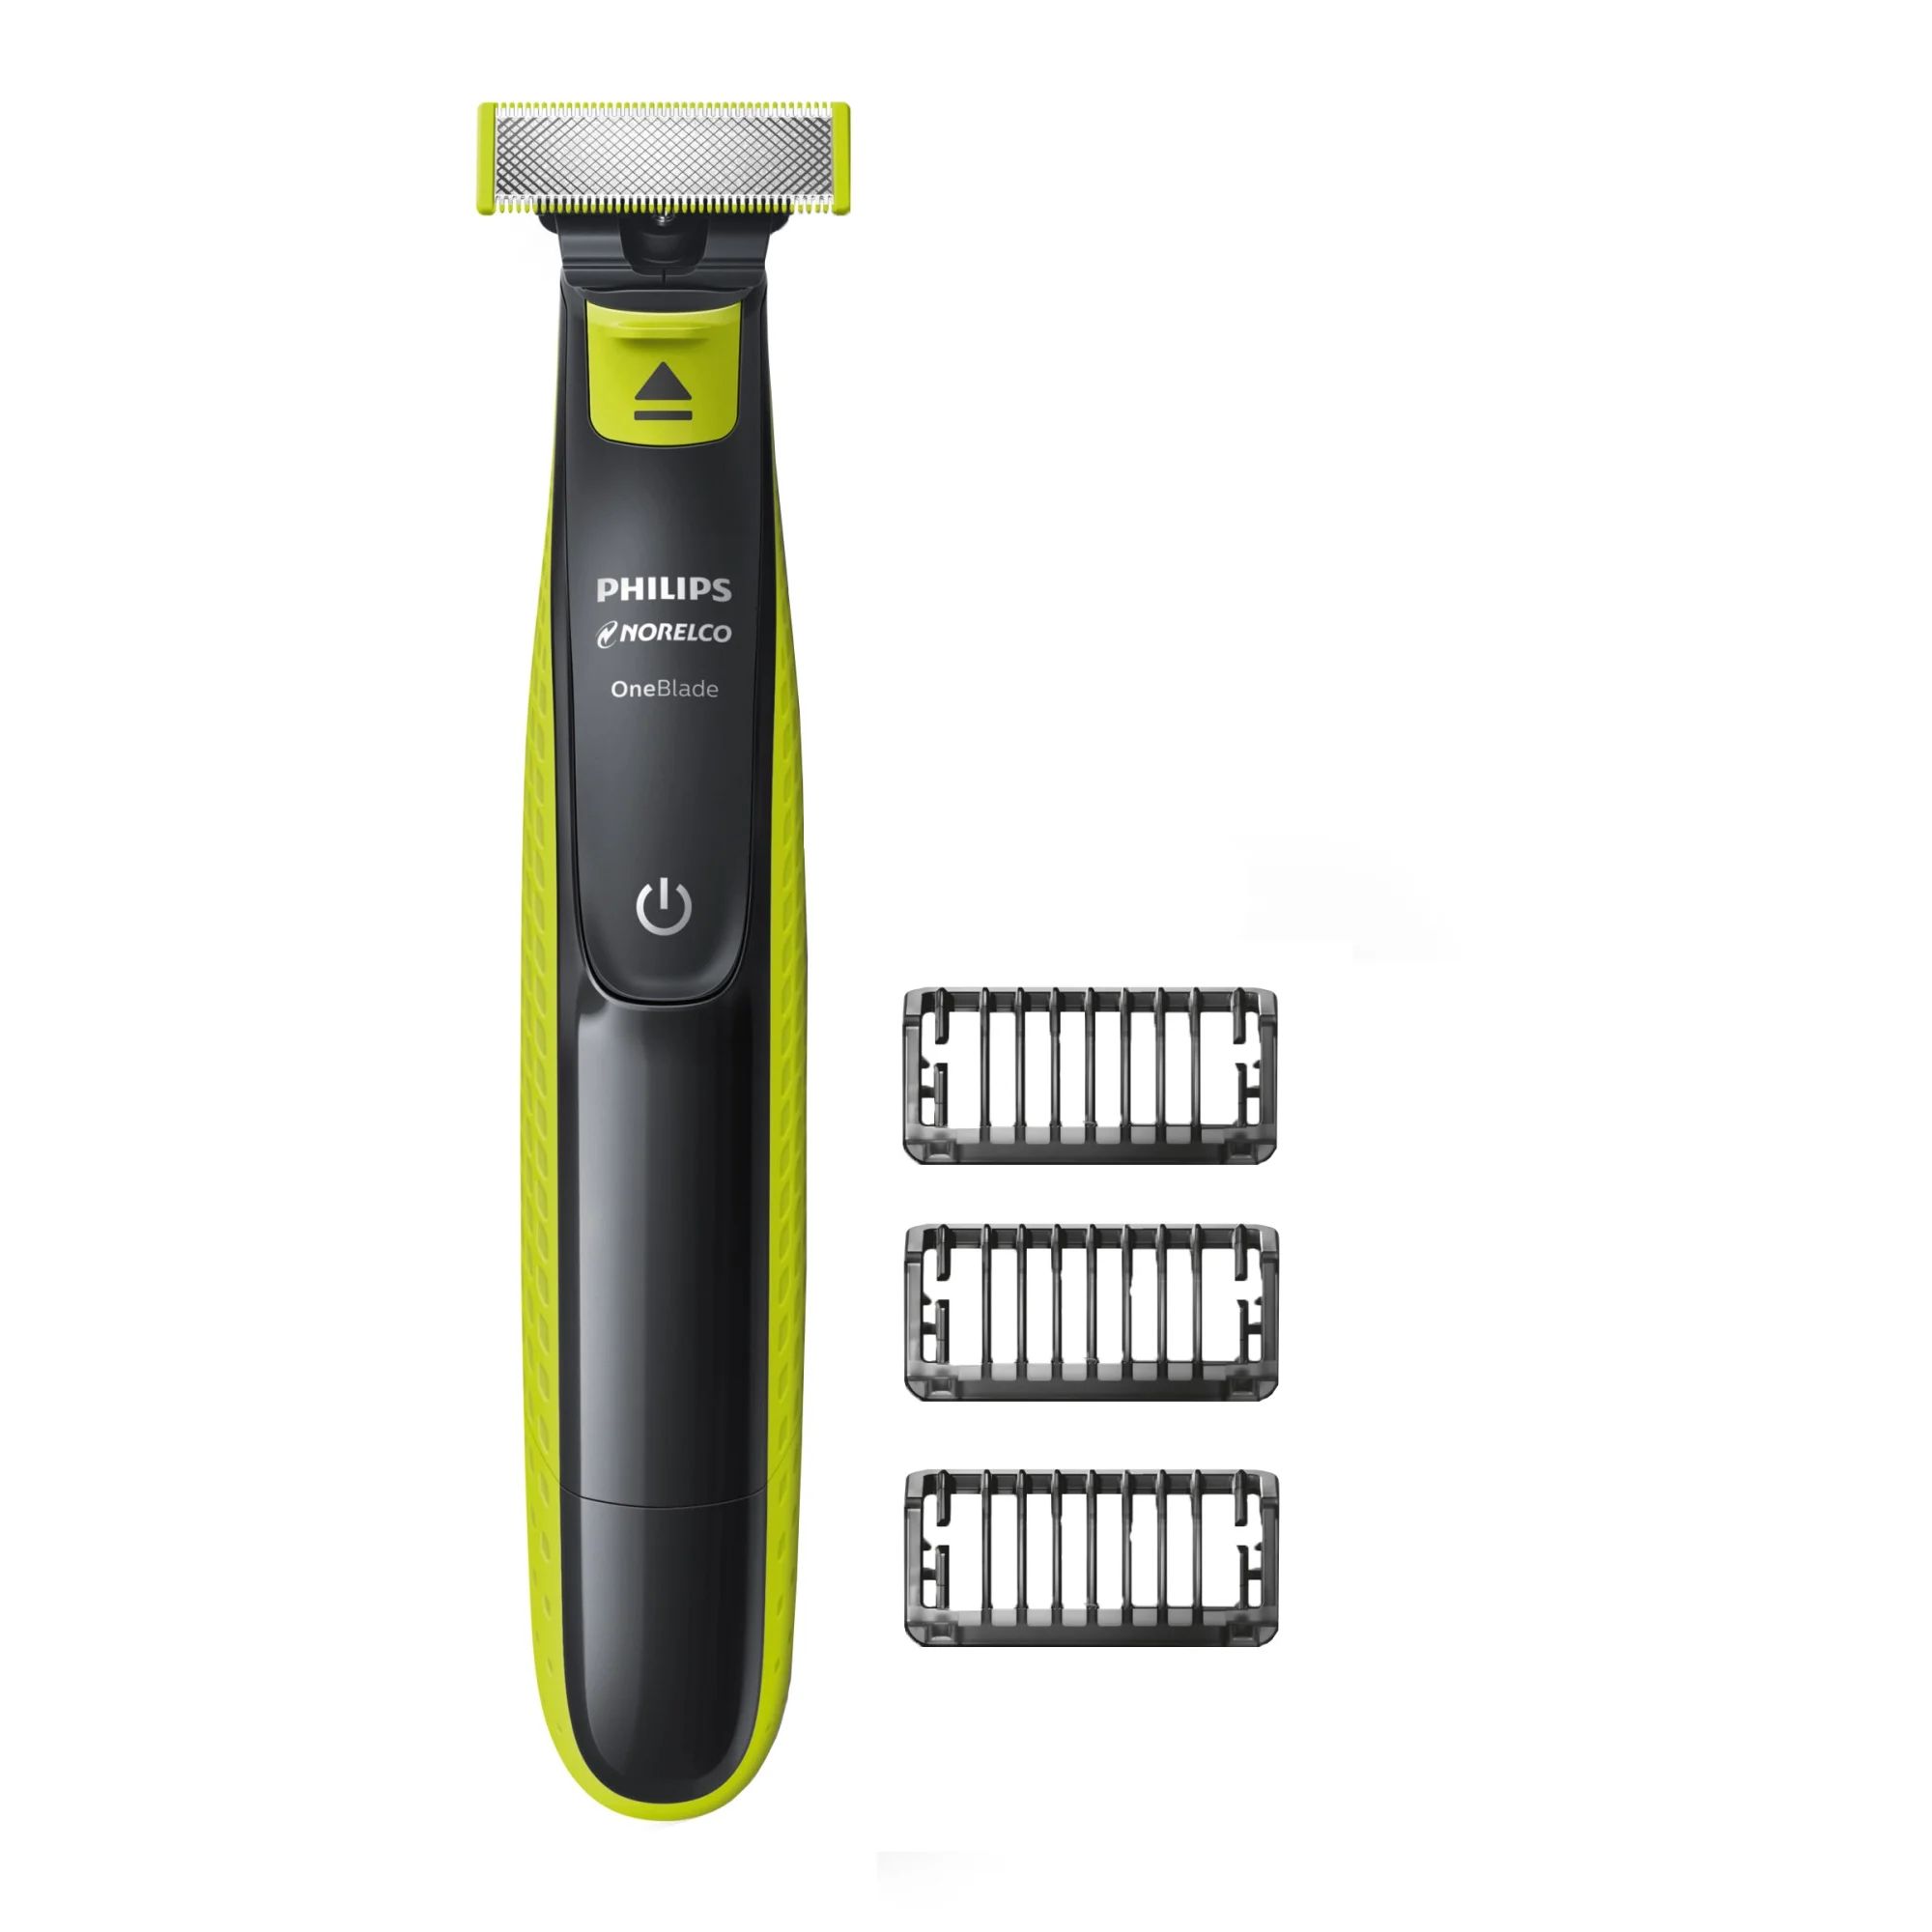 Philips Norelco Oneblade Hybrid Electric Trimmer and Shaver, Rechargeable, Black QP2520/70 | Walmart (US)